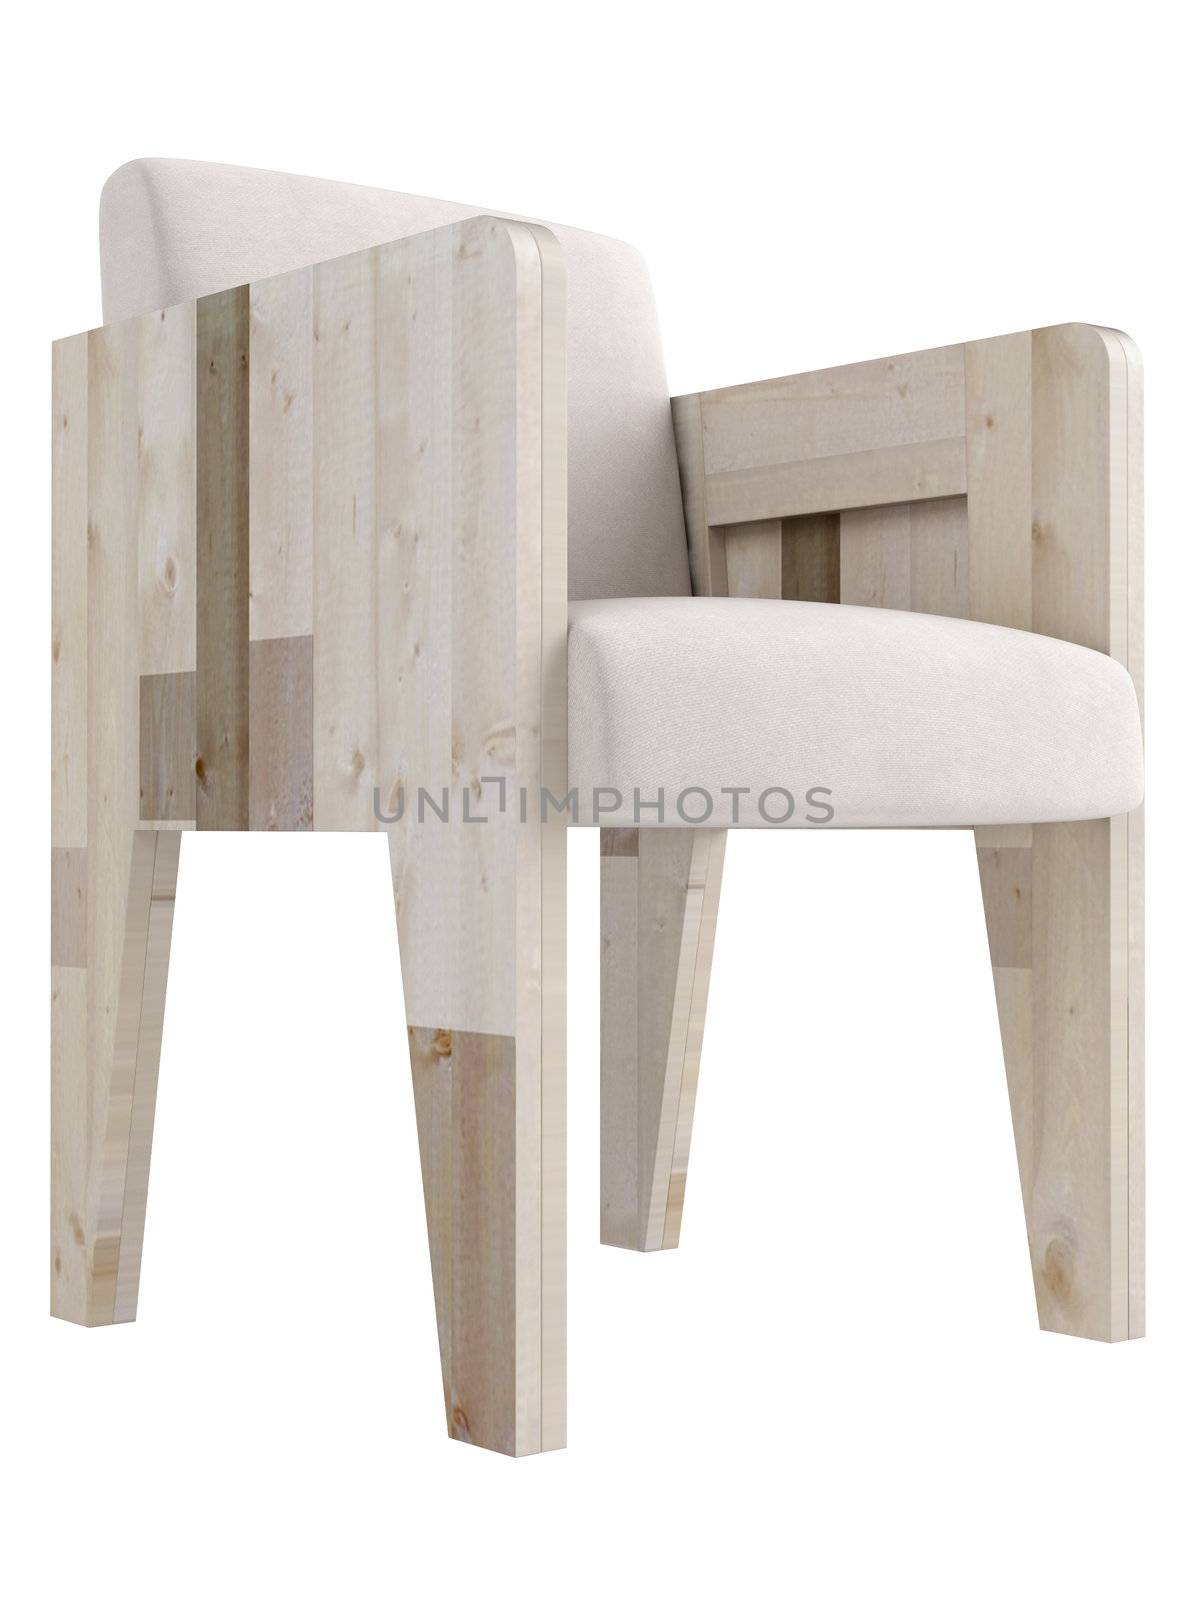 Modern wooden framed armchair with upholstered cushions isolated on a white background